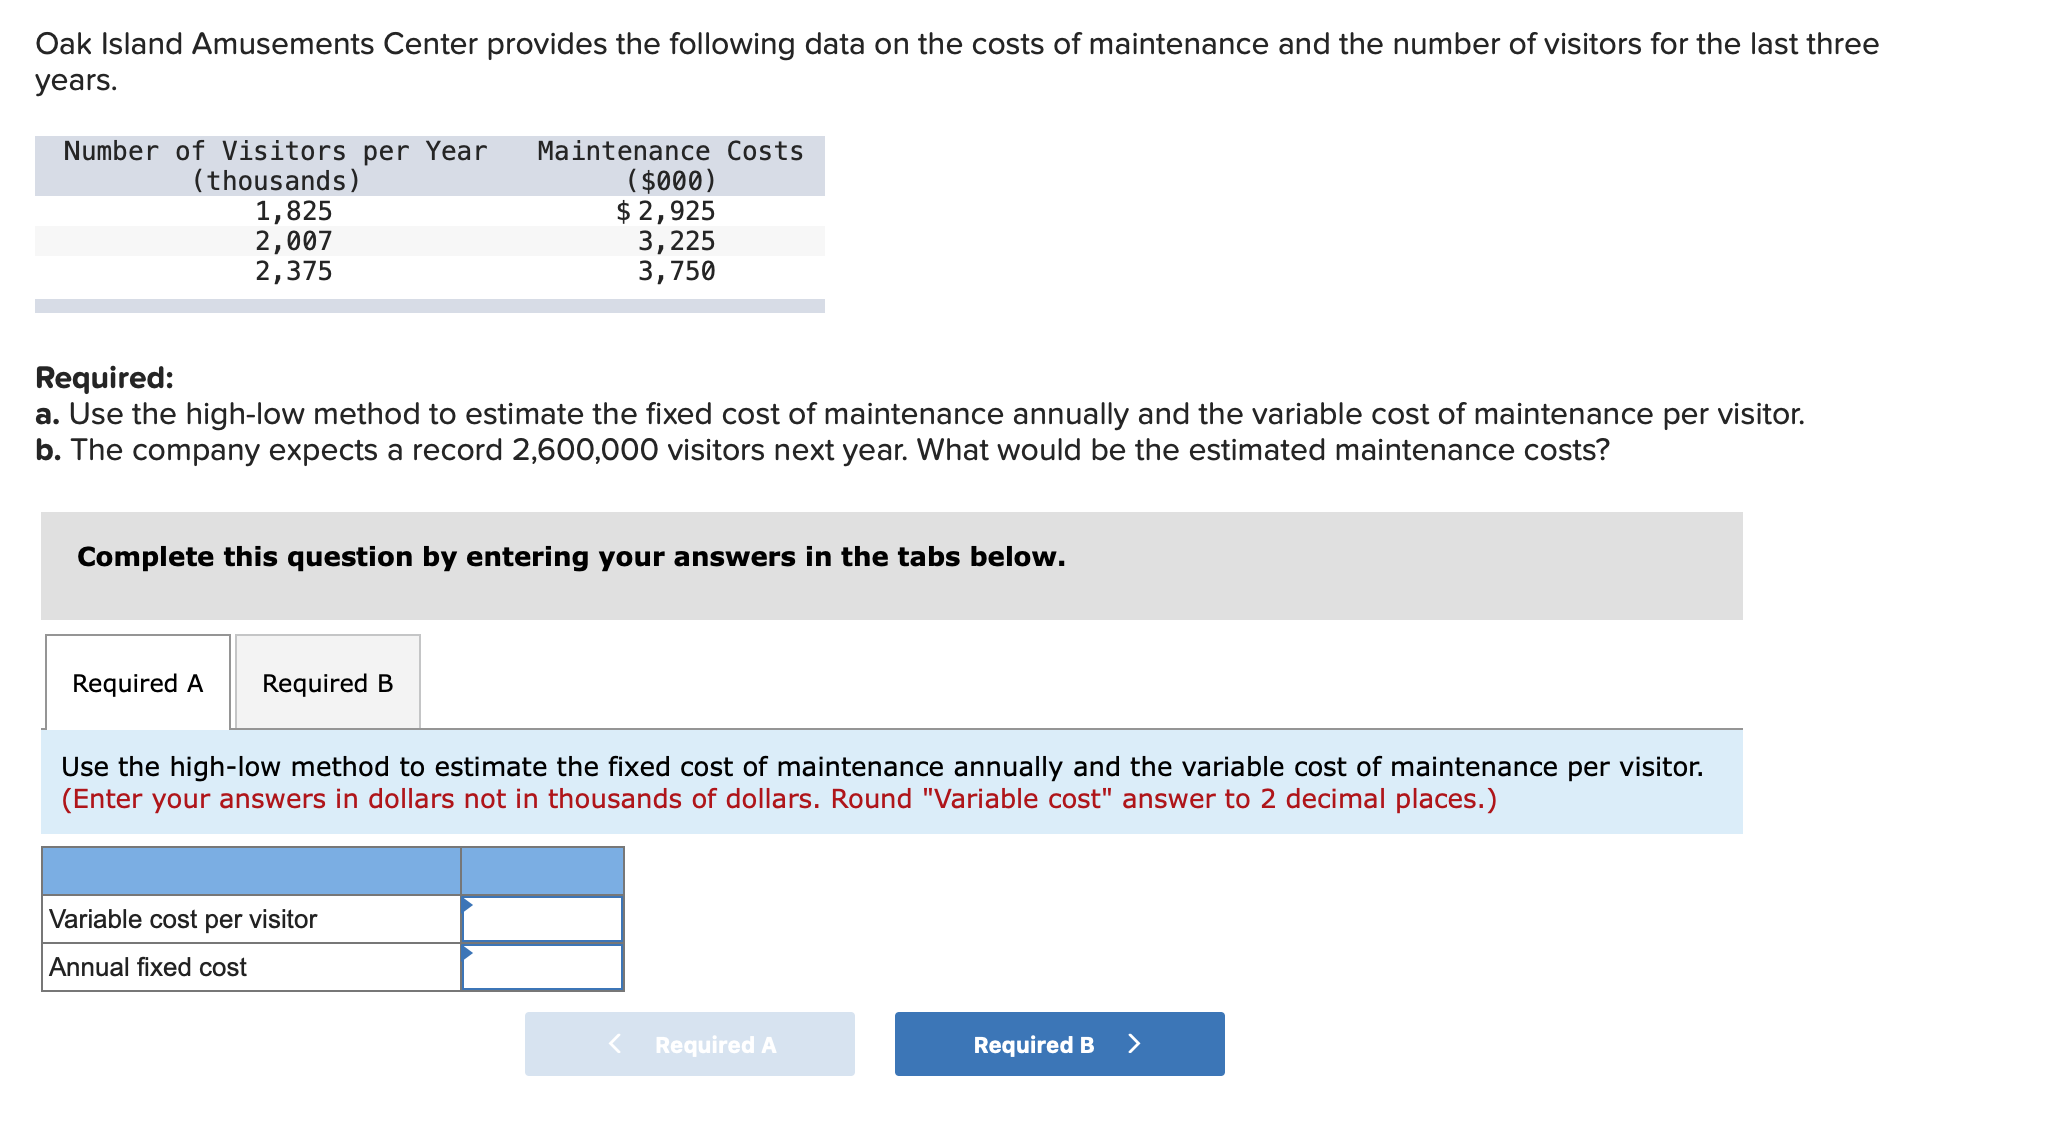 Required:
a. Use the high-low method to estimate the fixed cost of maintenance annually and the variable cost of maintenance per visitor.
b. The company expects a record 2,600,000 visitors next year. What would be the estimated maintenance costs?
Complete this question by entering your answers in the tabs below.
Required A
Required B
Use the high-low method to estimate the fixed cost of maintenance annually and the variable cost of maintenance per visitor.
(Enter your answers in dollars not in thousands of dollars. Round "Variable cost" answer to 2 decimal places.)
Variable cost per visitor
Annual fixed cost
